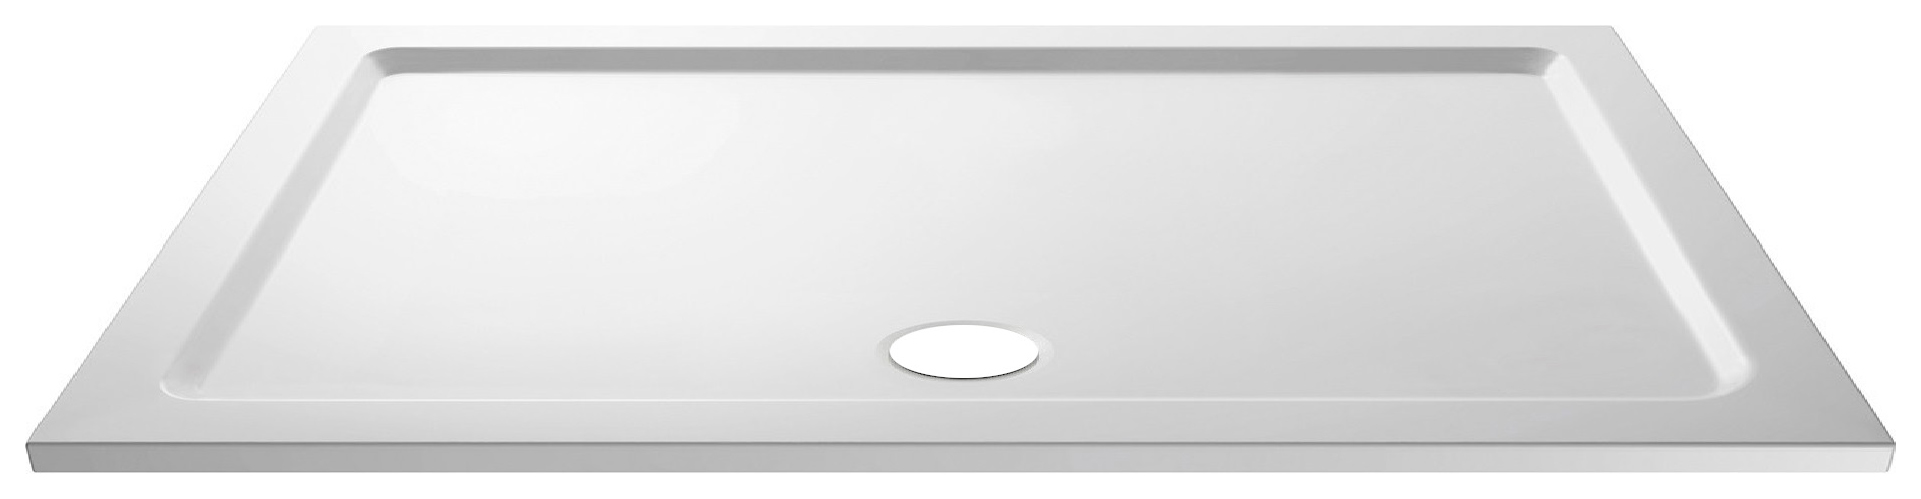 Image of Wickes 40mm Pearlstone Rectangular Shower Tray - 1600 x 800mm